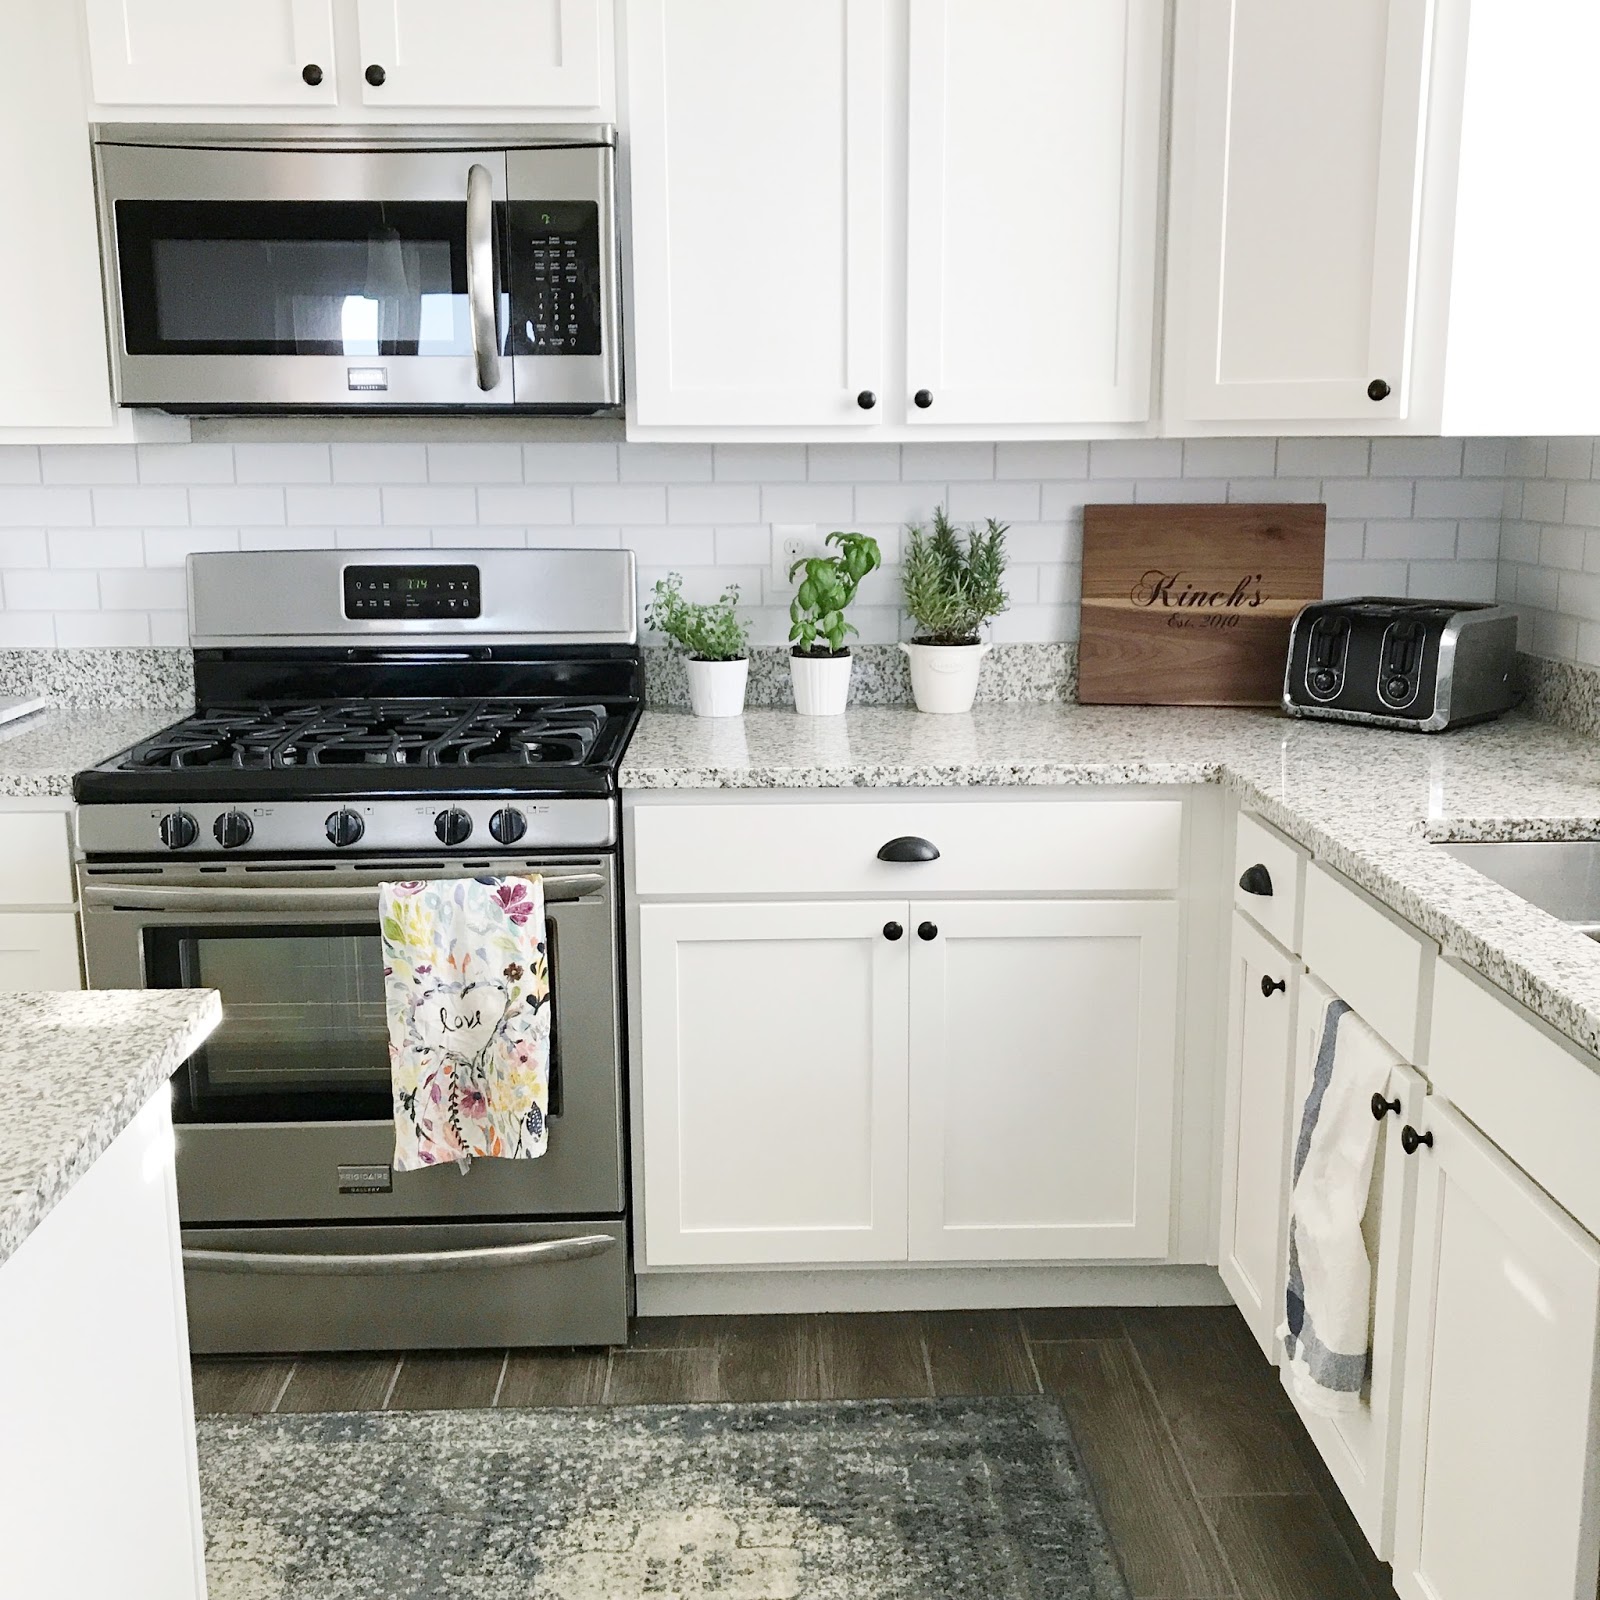 Aubrey Kinch | The Blog: Tweaking the Kitchen with Removable Wallpaper